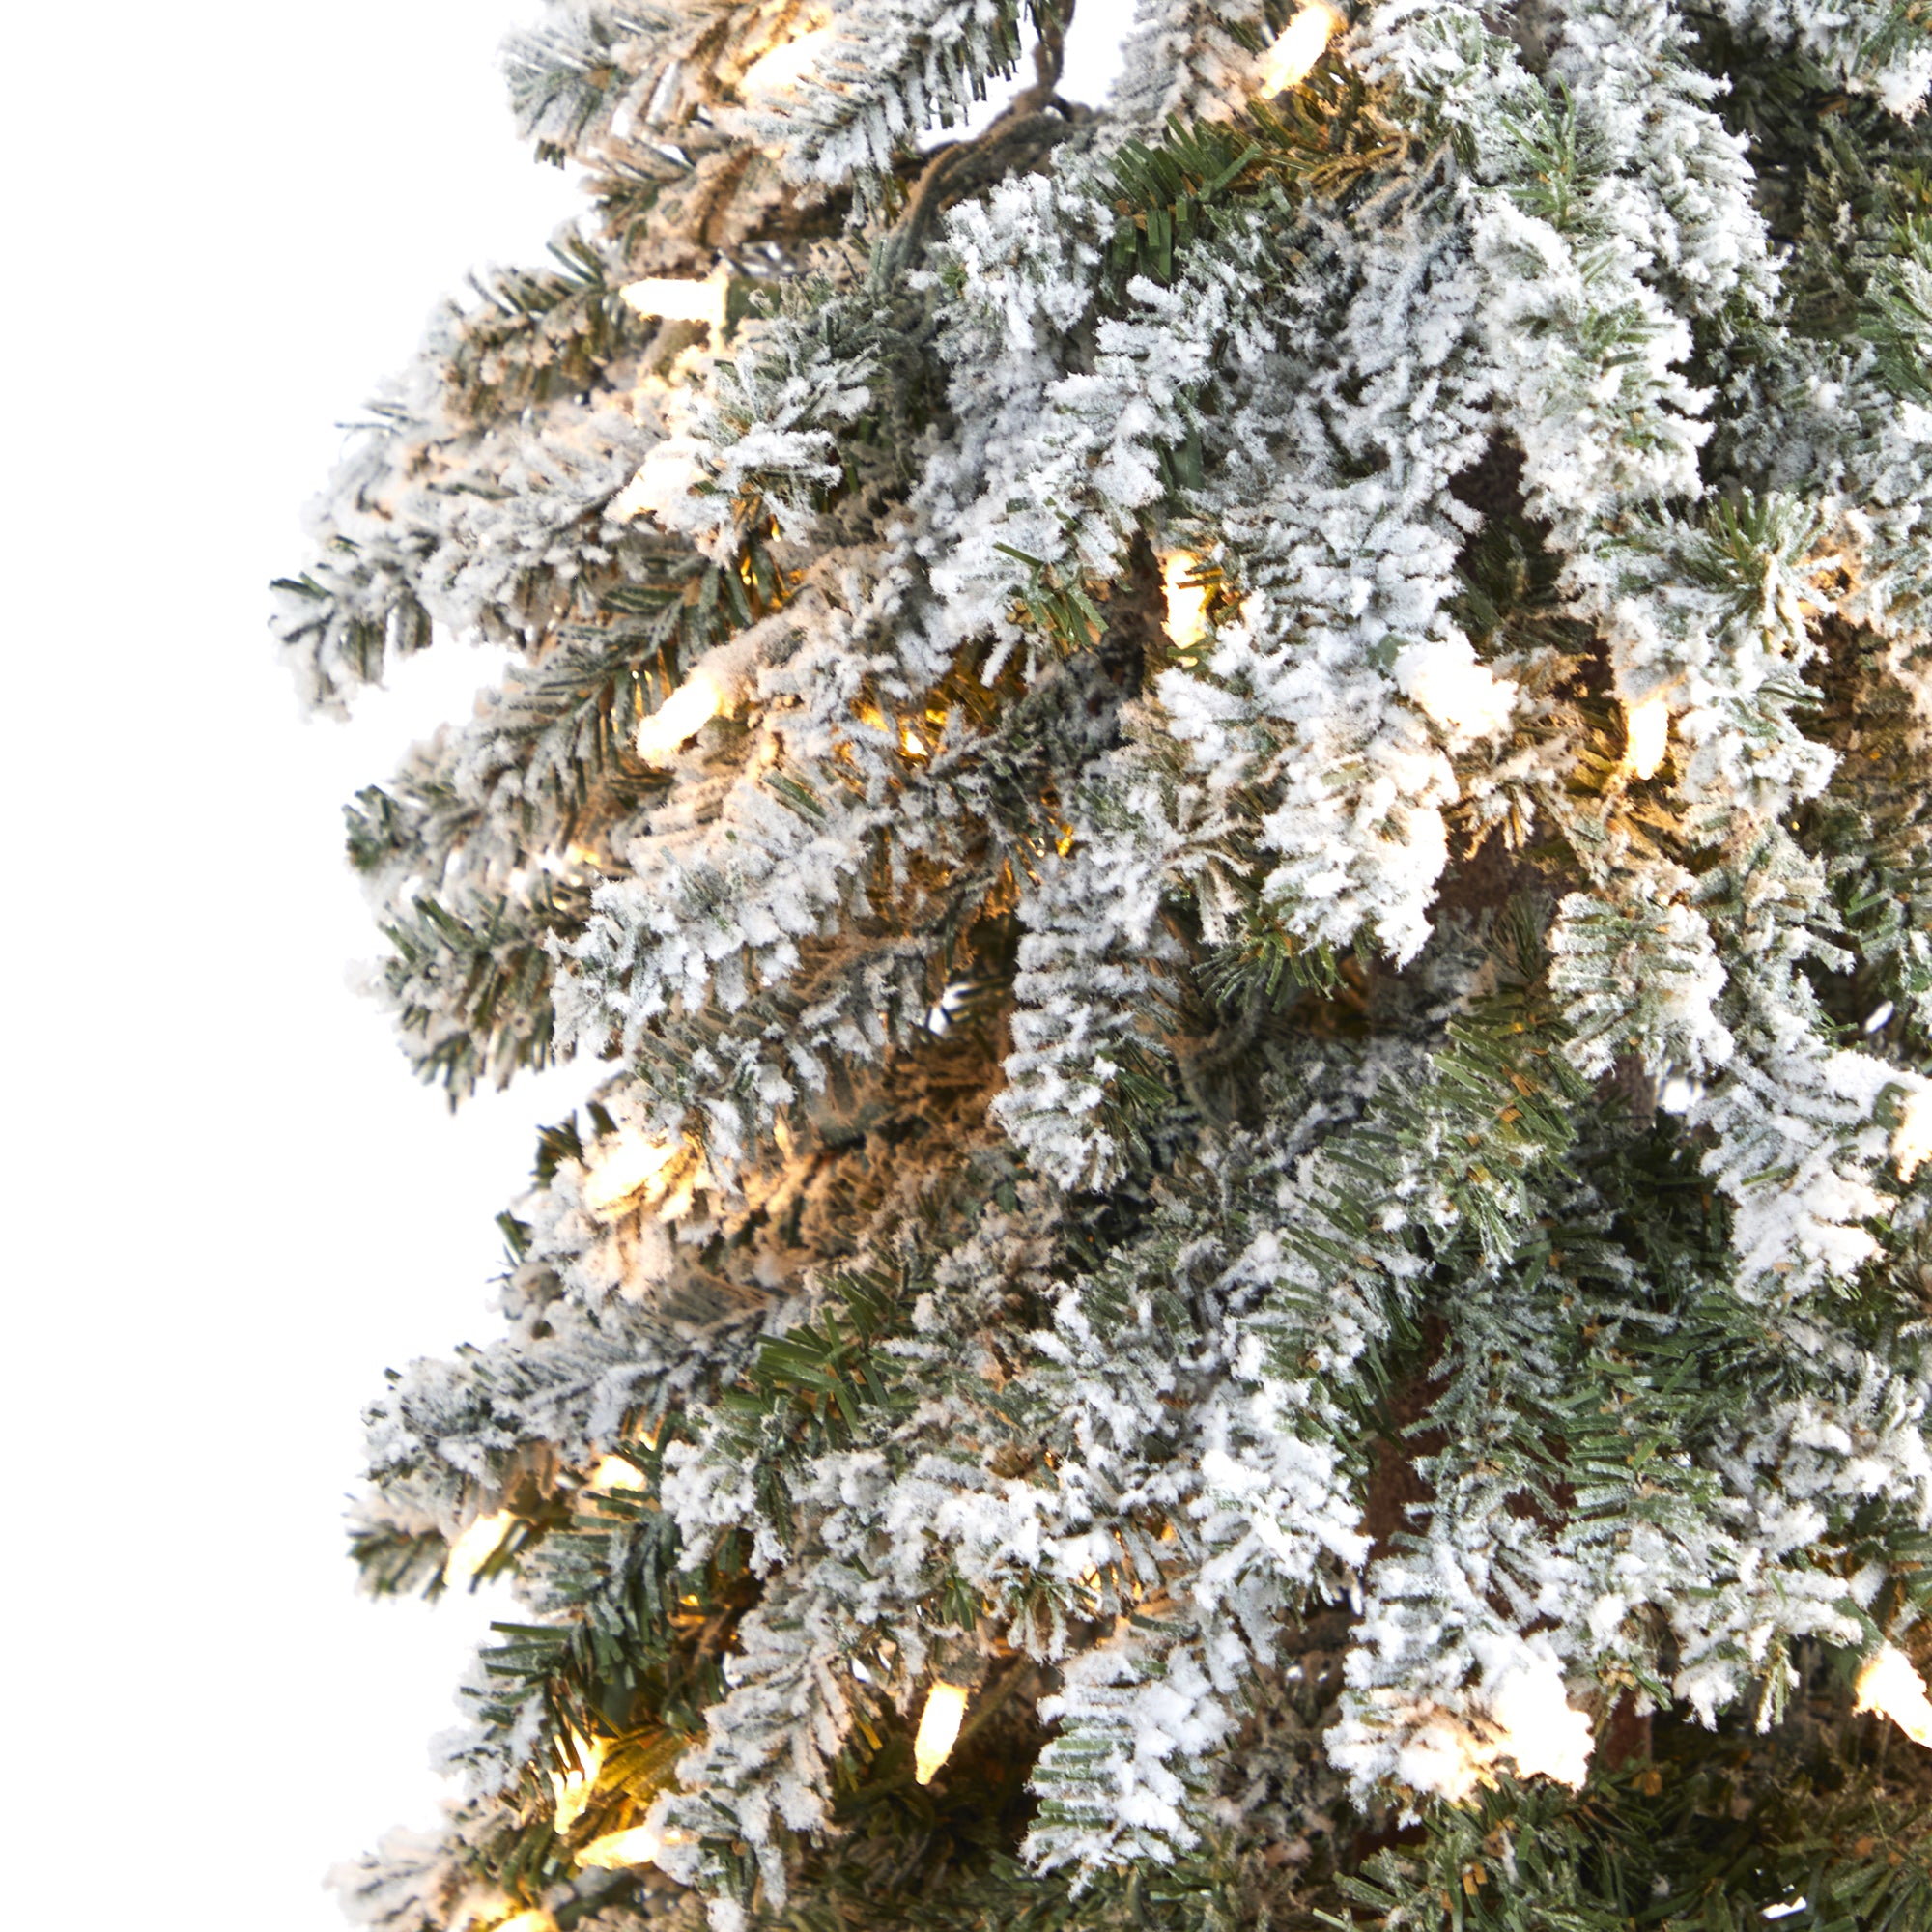 50"� Frosted Swiss Pine Artificial Christmas Tree with 100 Clear LED Lights and Berries in White Planter